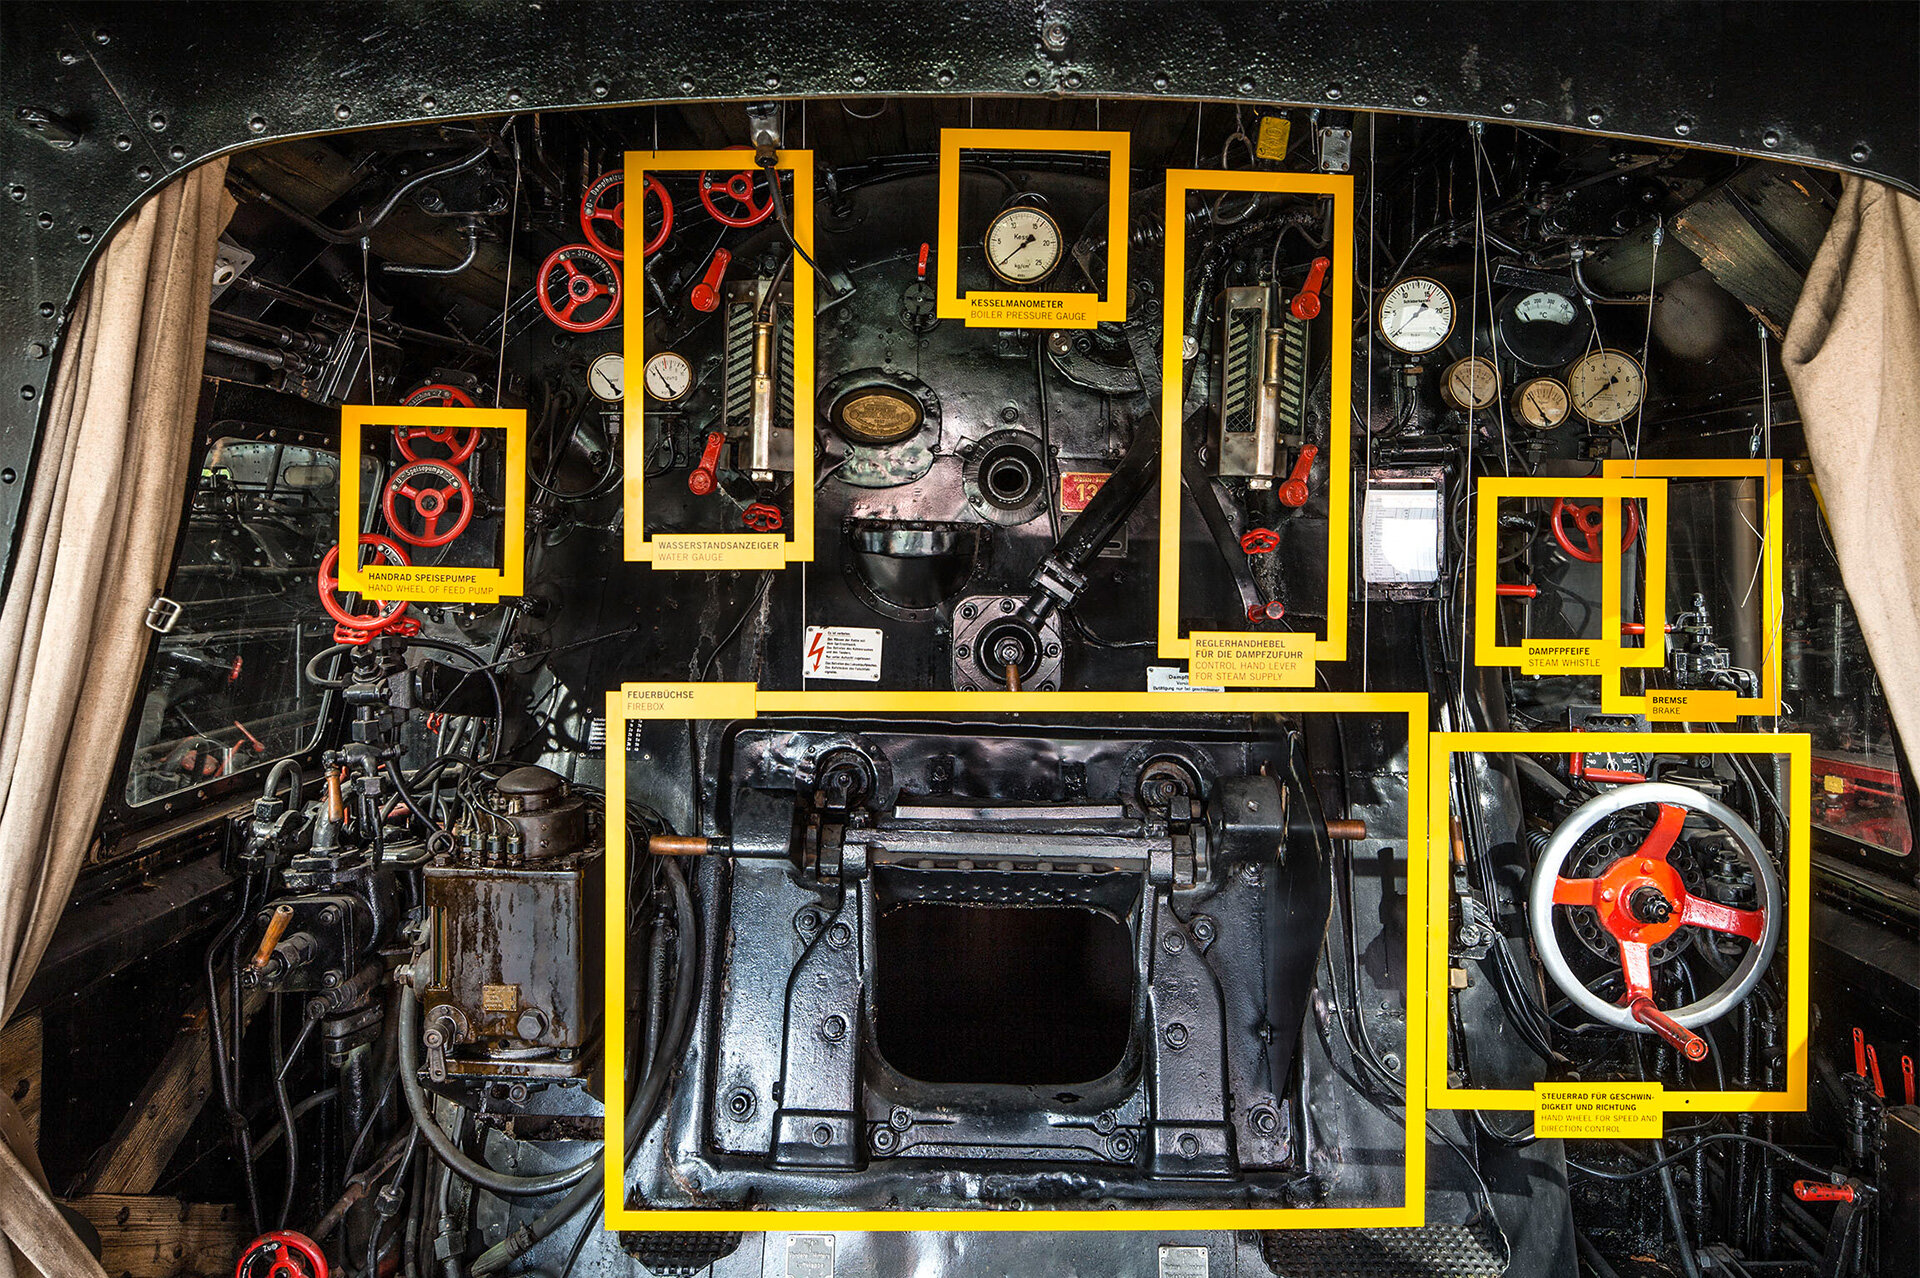 Labelled components of the driver's compartment of a steam locomotive